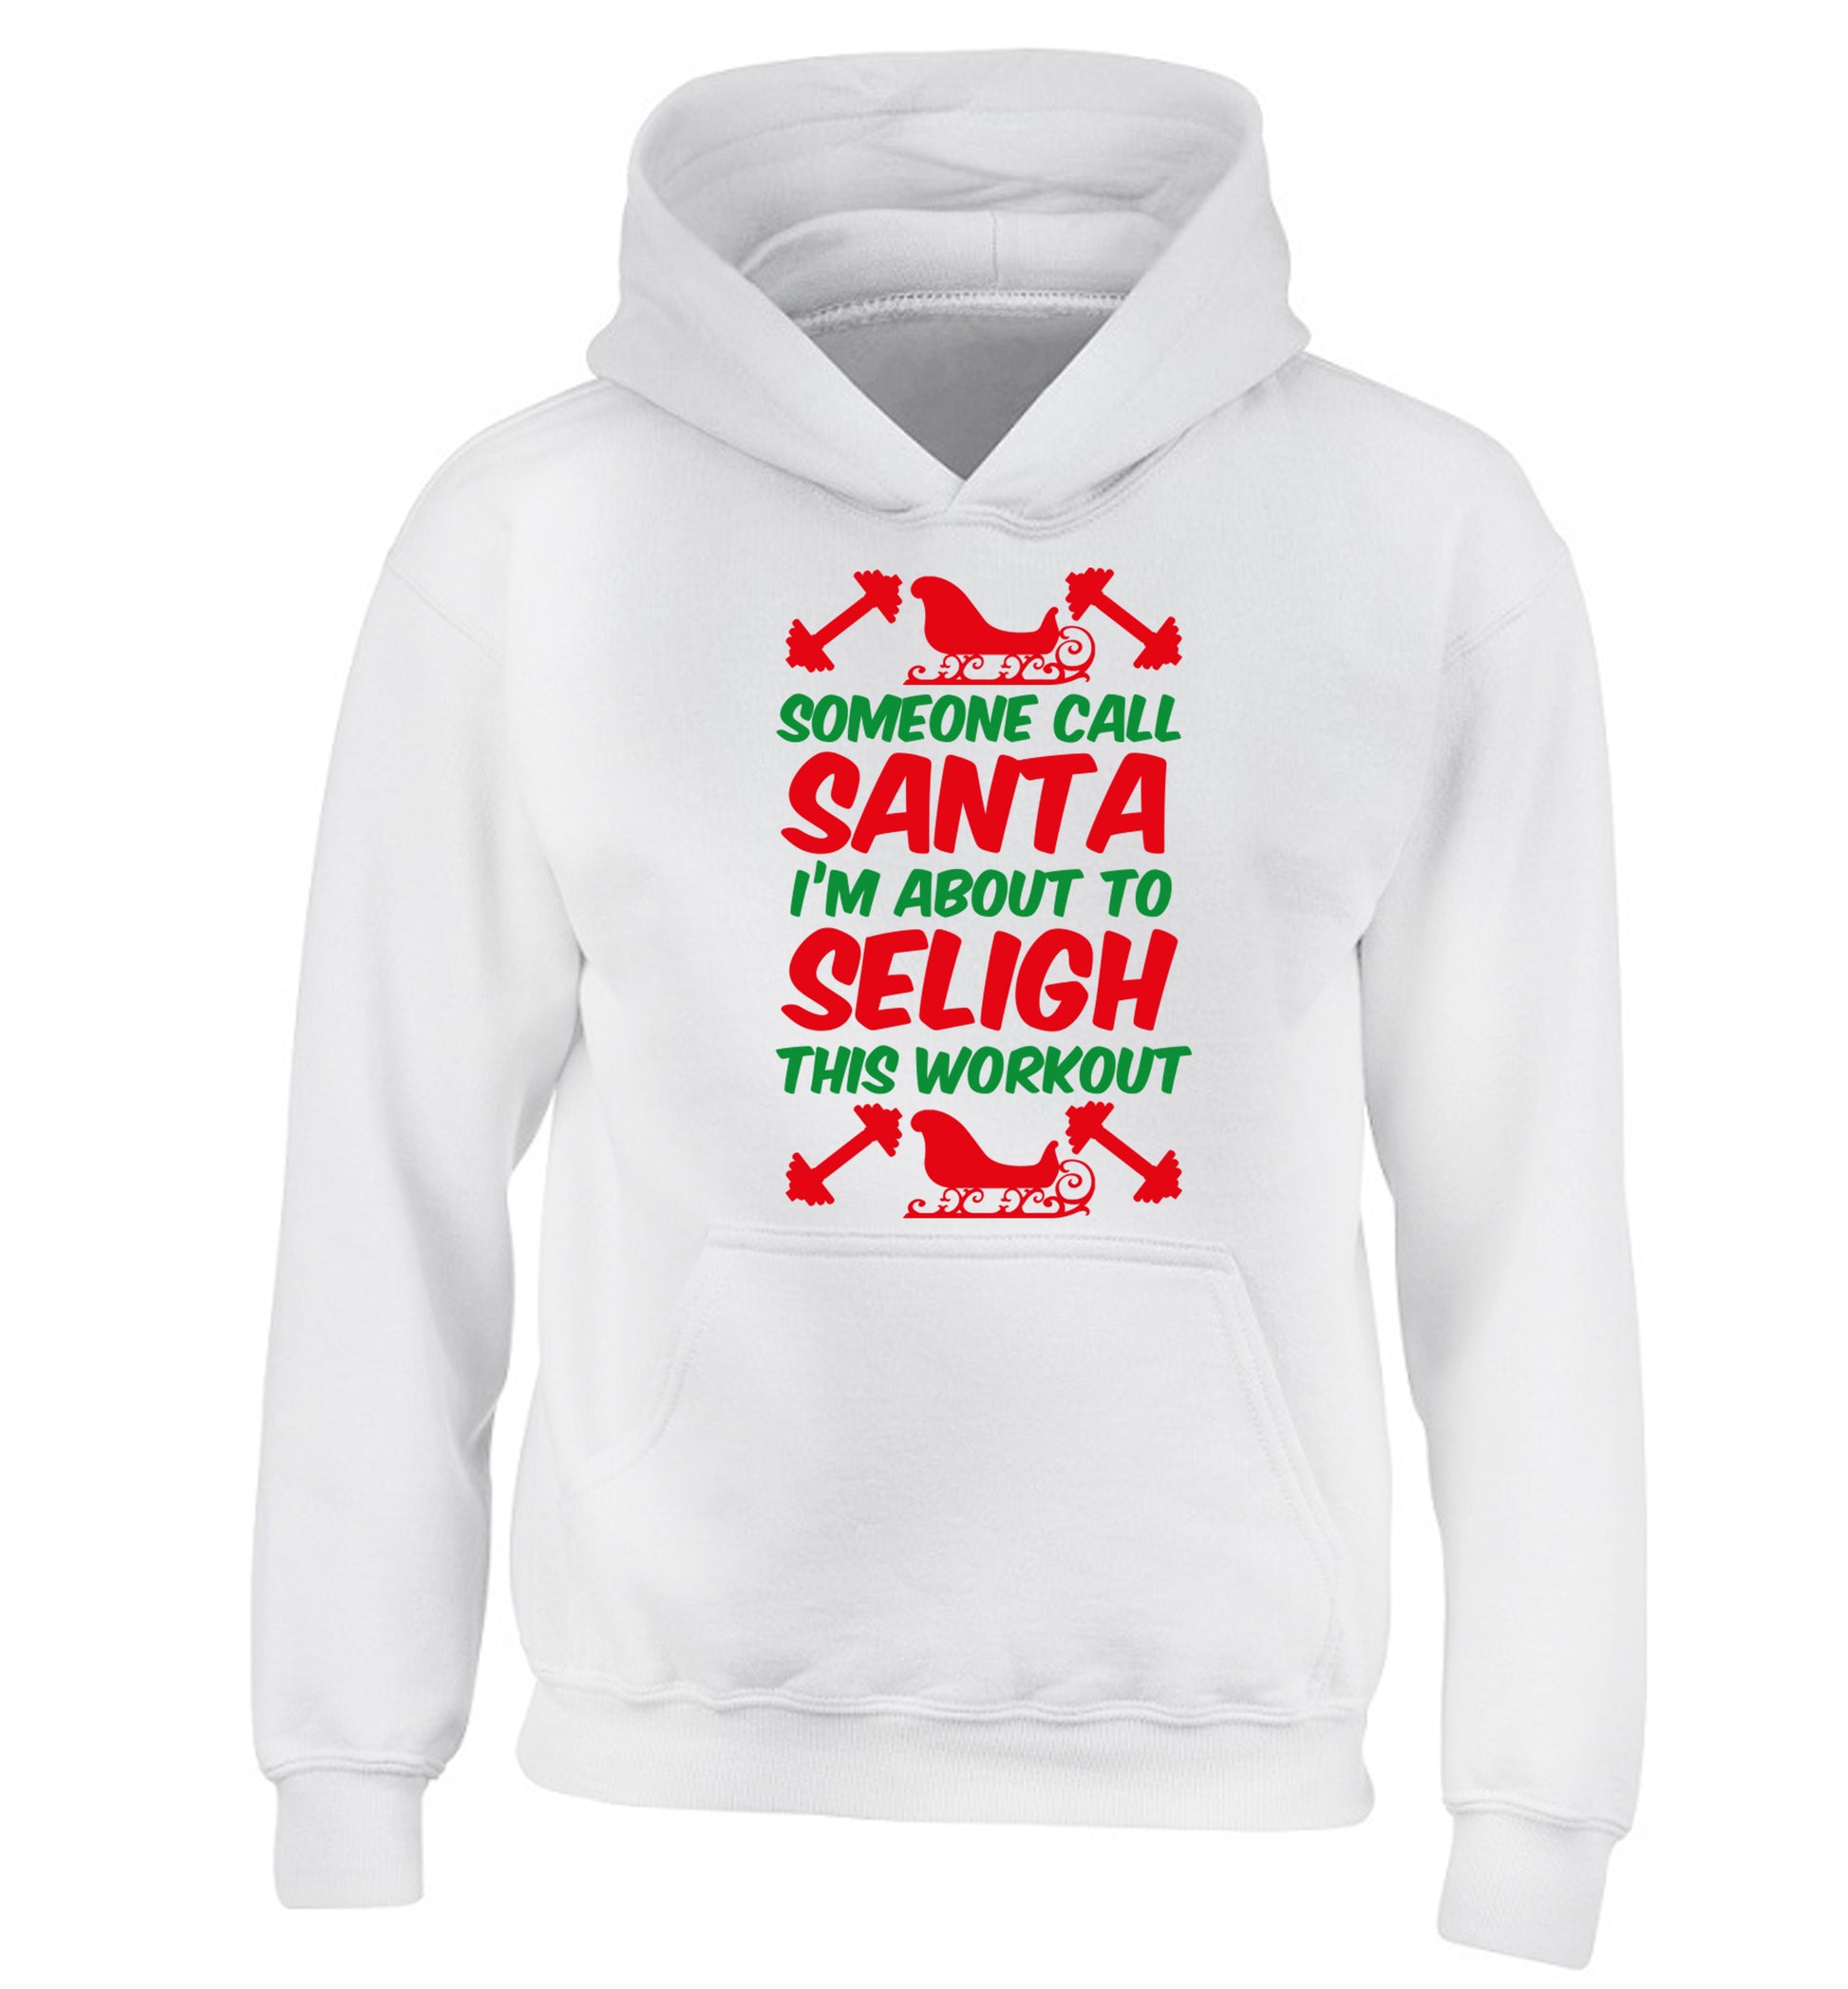 Someone call santa, I'm about to sleigh this workout children's white hoodie 12-14 Years